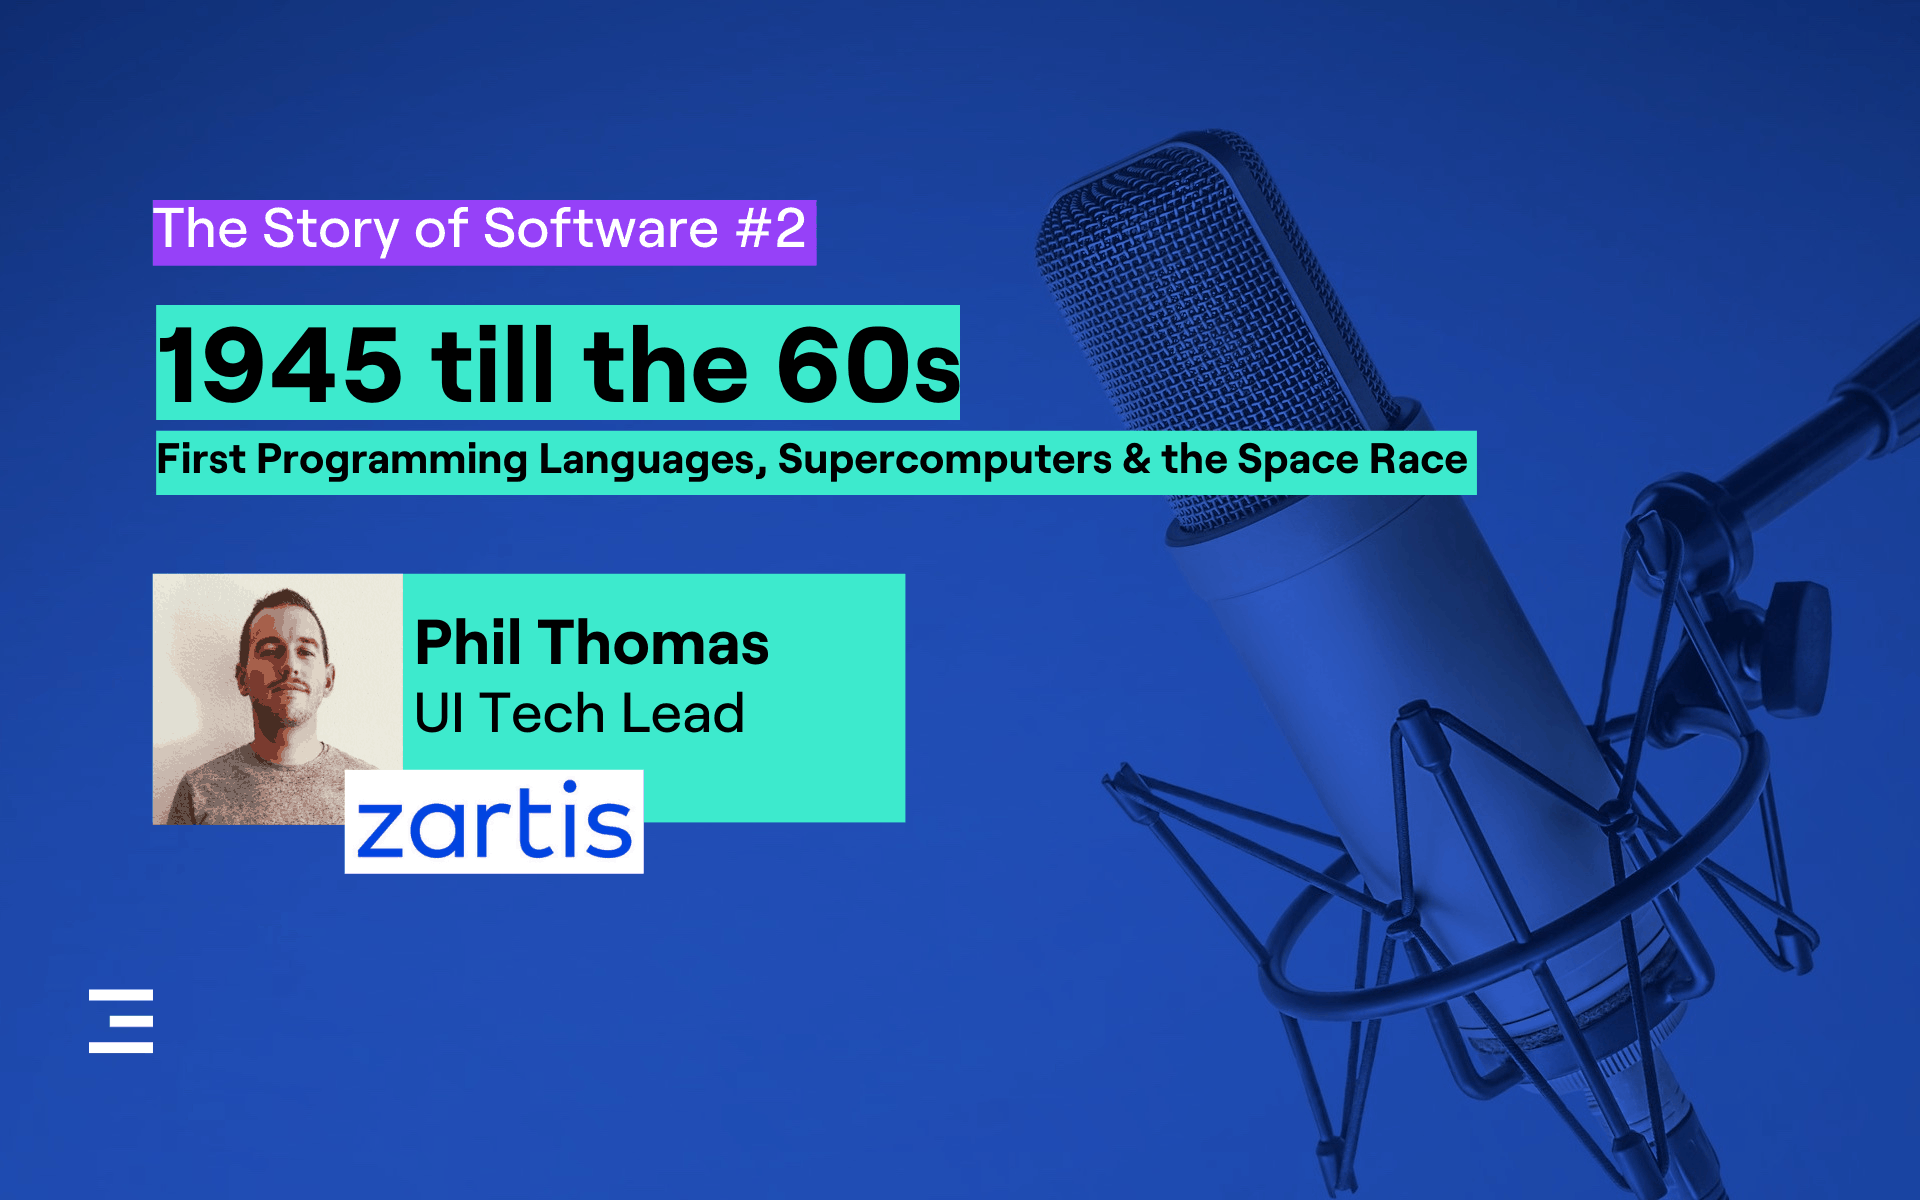 episode 2 of the story of software podcast, 1945 till 1960 - first programming languages, supercomputers and the space race